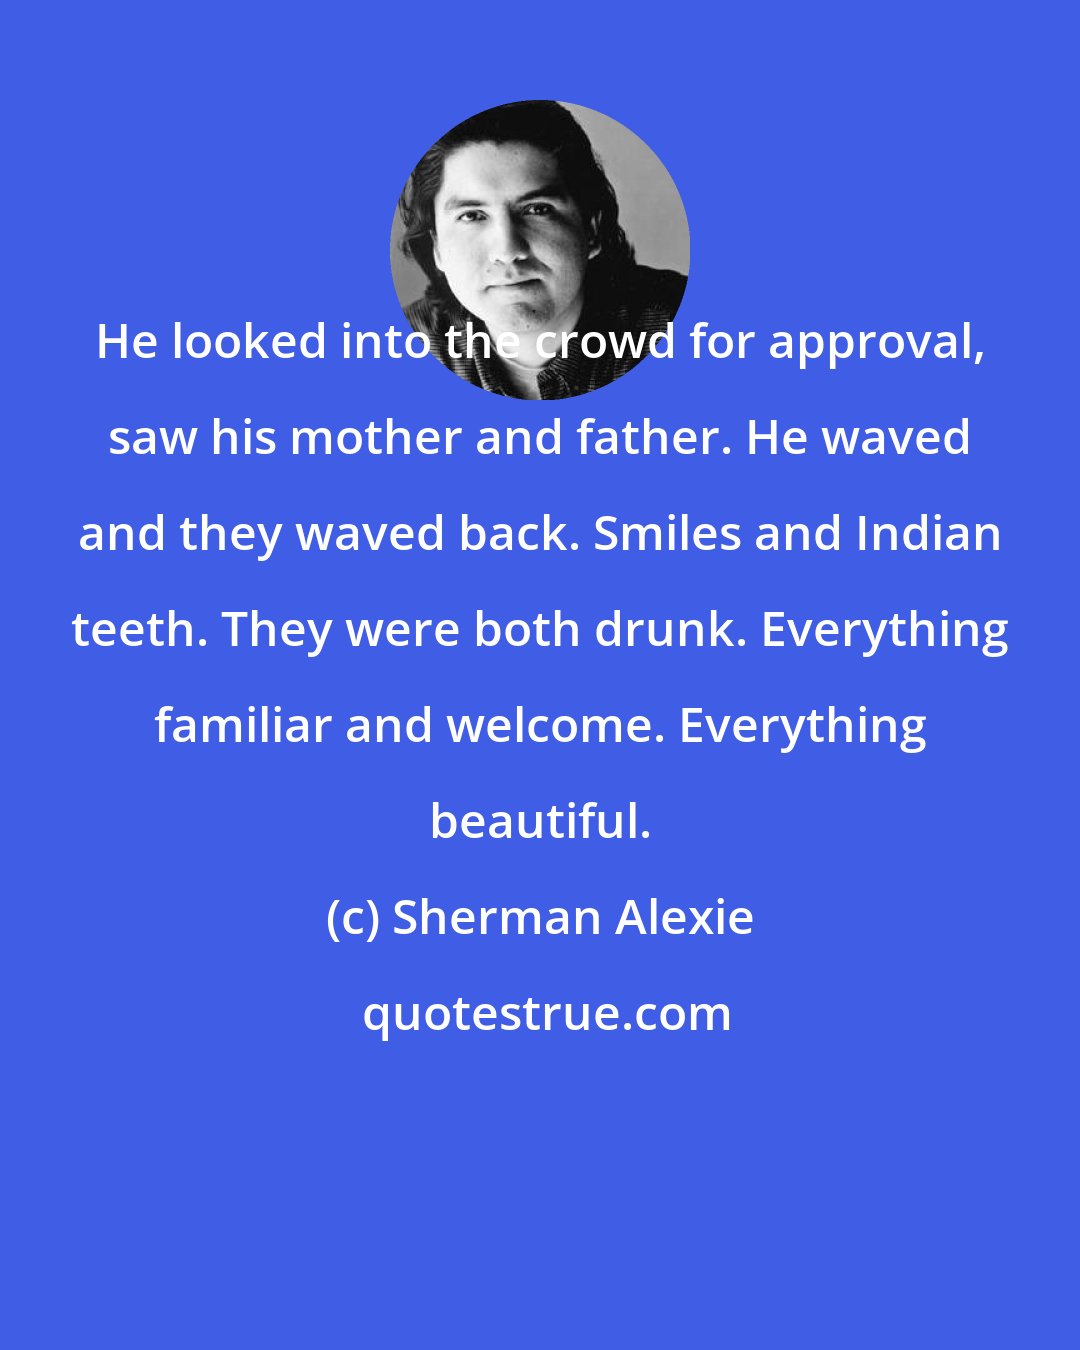 Sherman Alexie: He looked into the crowd for approval, saw his mother and father. He waved and they waved back. Smiles and Indian teeth. They were both drunk. Everything familiar and welcome. Everything beautiful.